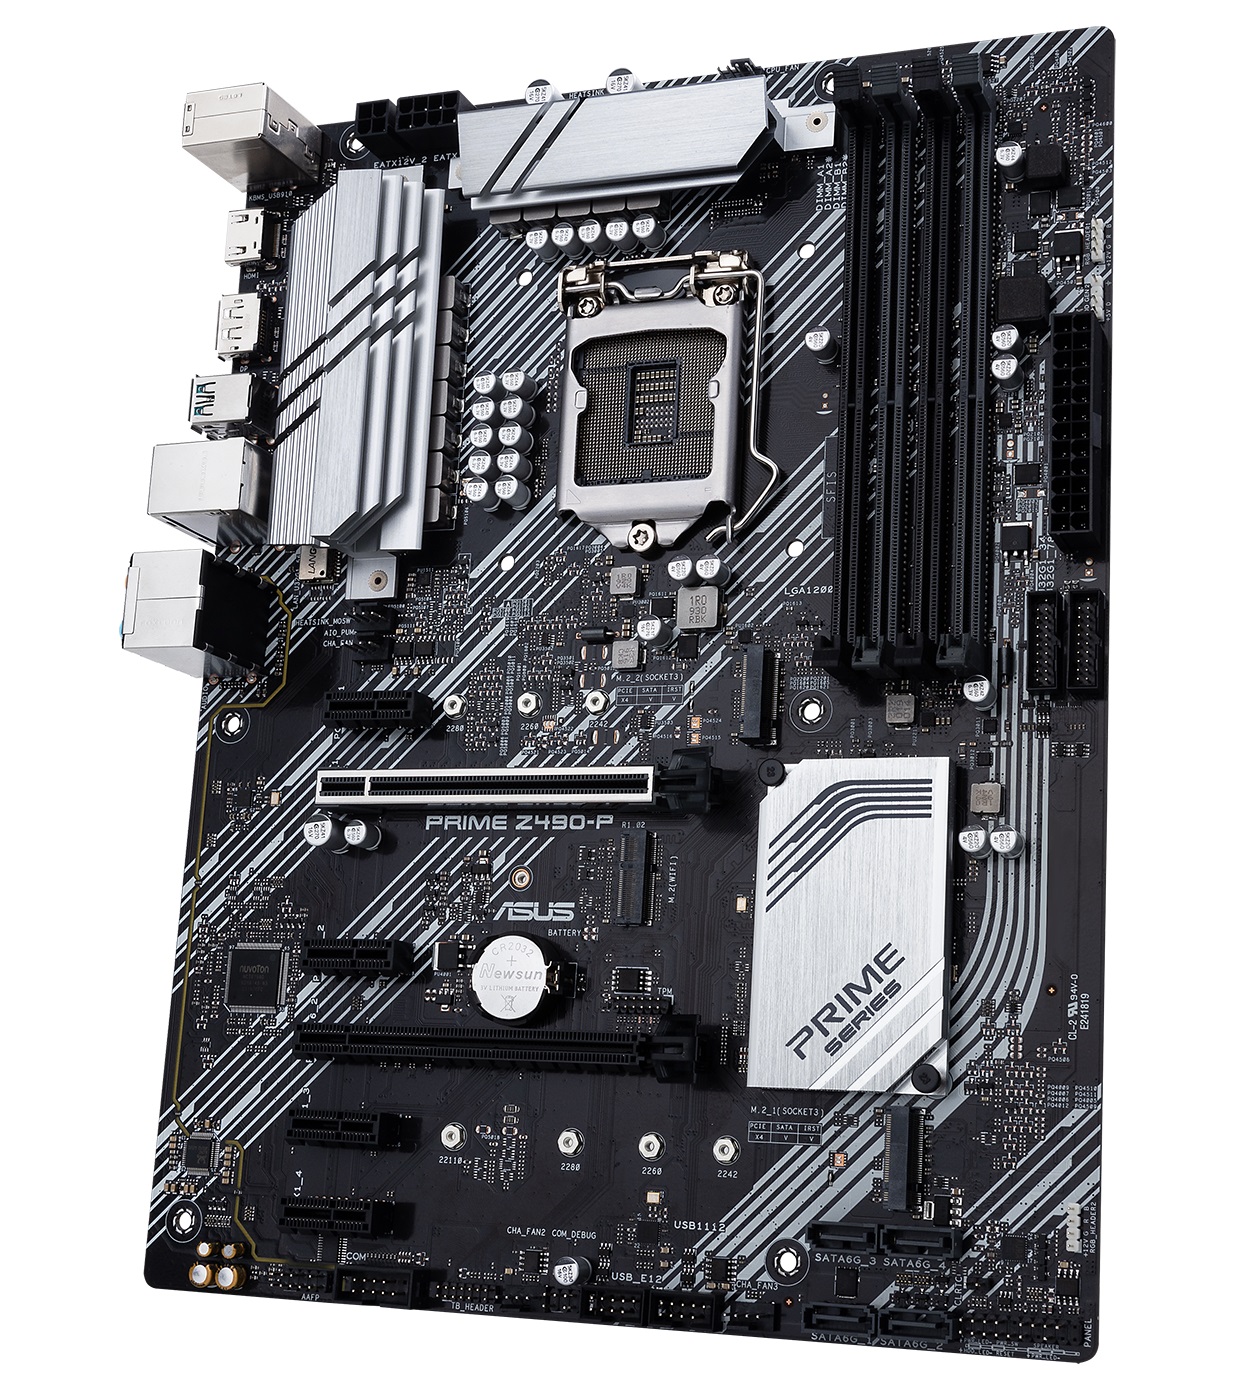 Asus Prime Z490 P The Intel Z490 Overview 44 Motherboards Examined